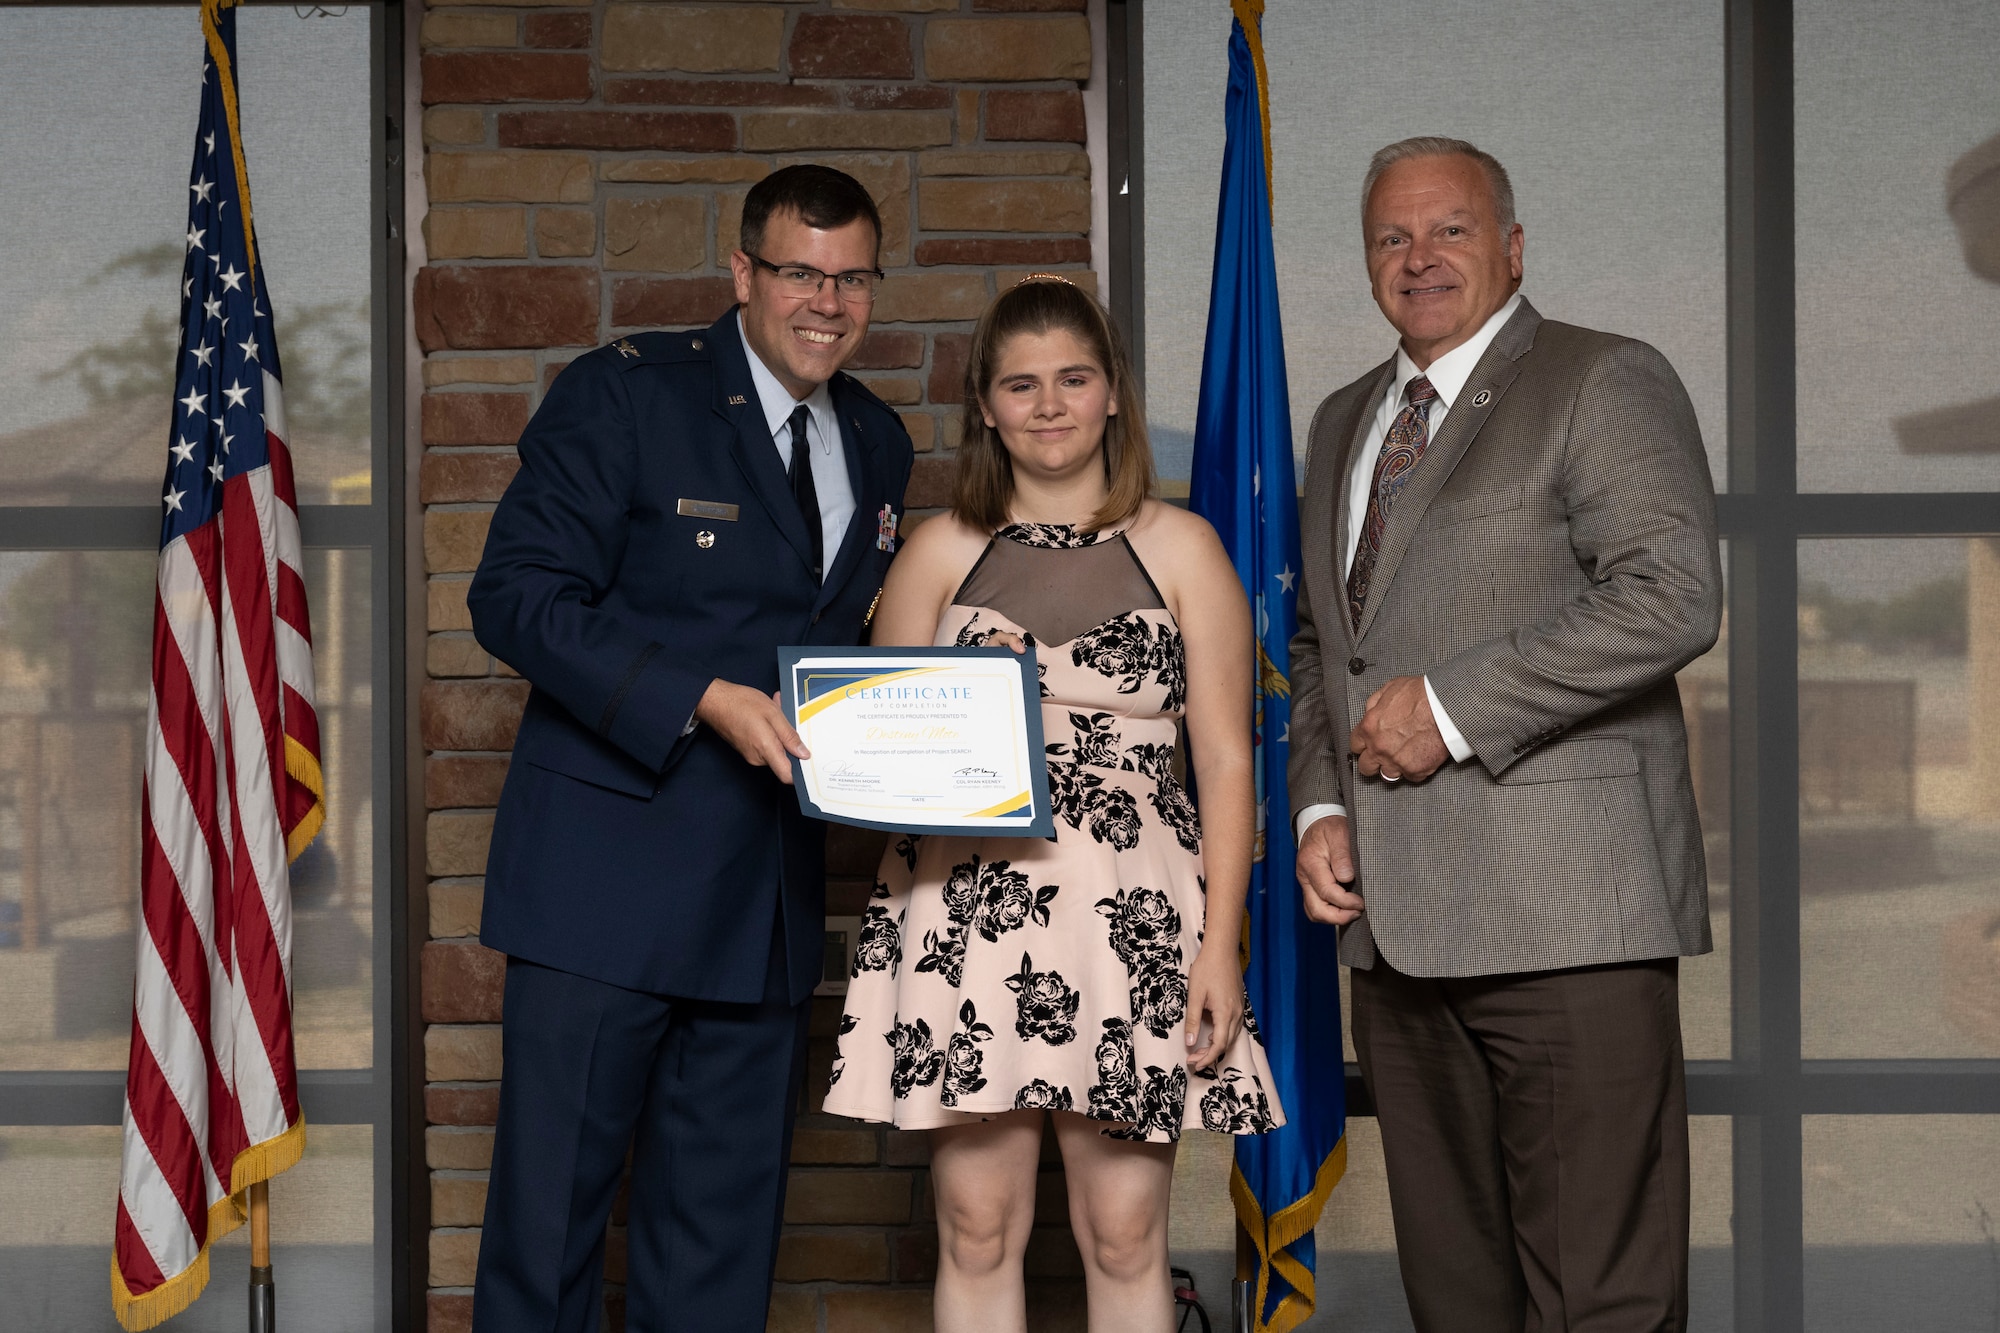 Destiny Mote, Project SEARCH intern, receives graduation certificate, May 24, 2022, on Holloman Air Force Base, New Mexico.